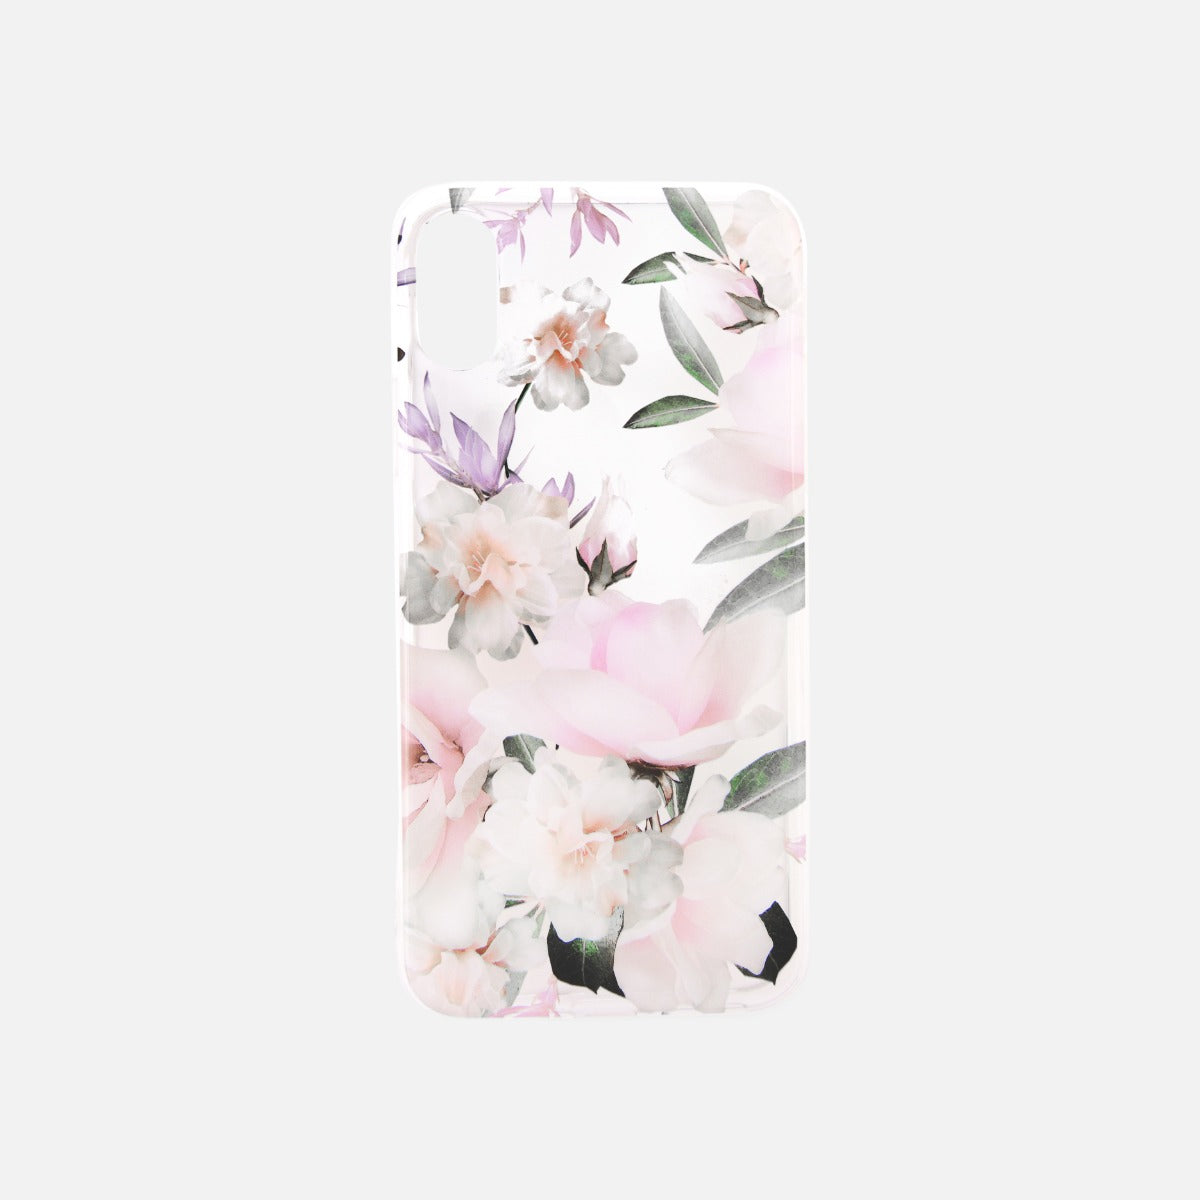 Iphone case with pink and green flowers 